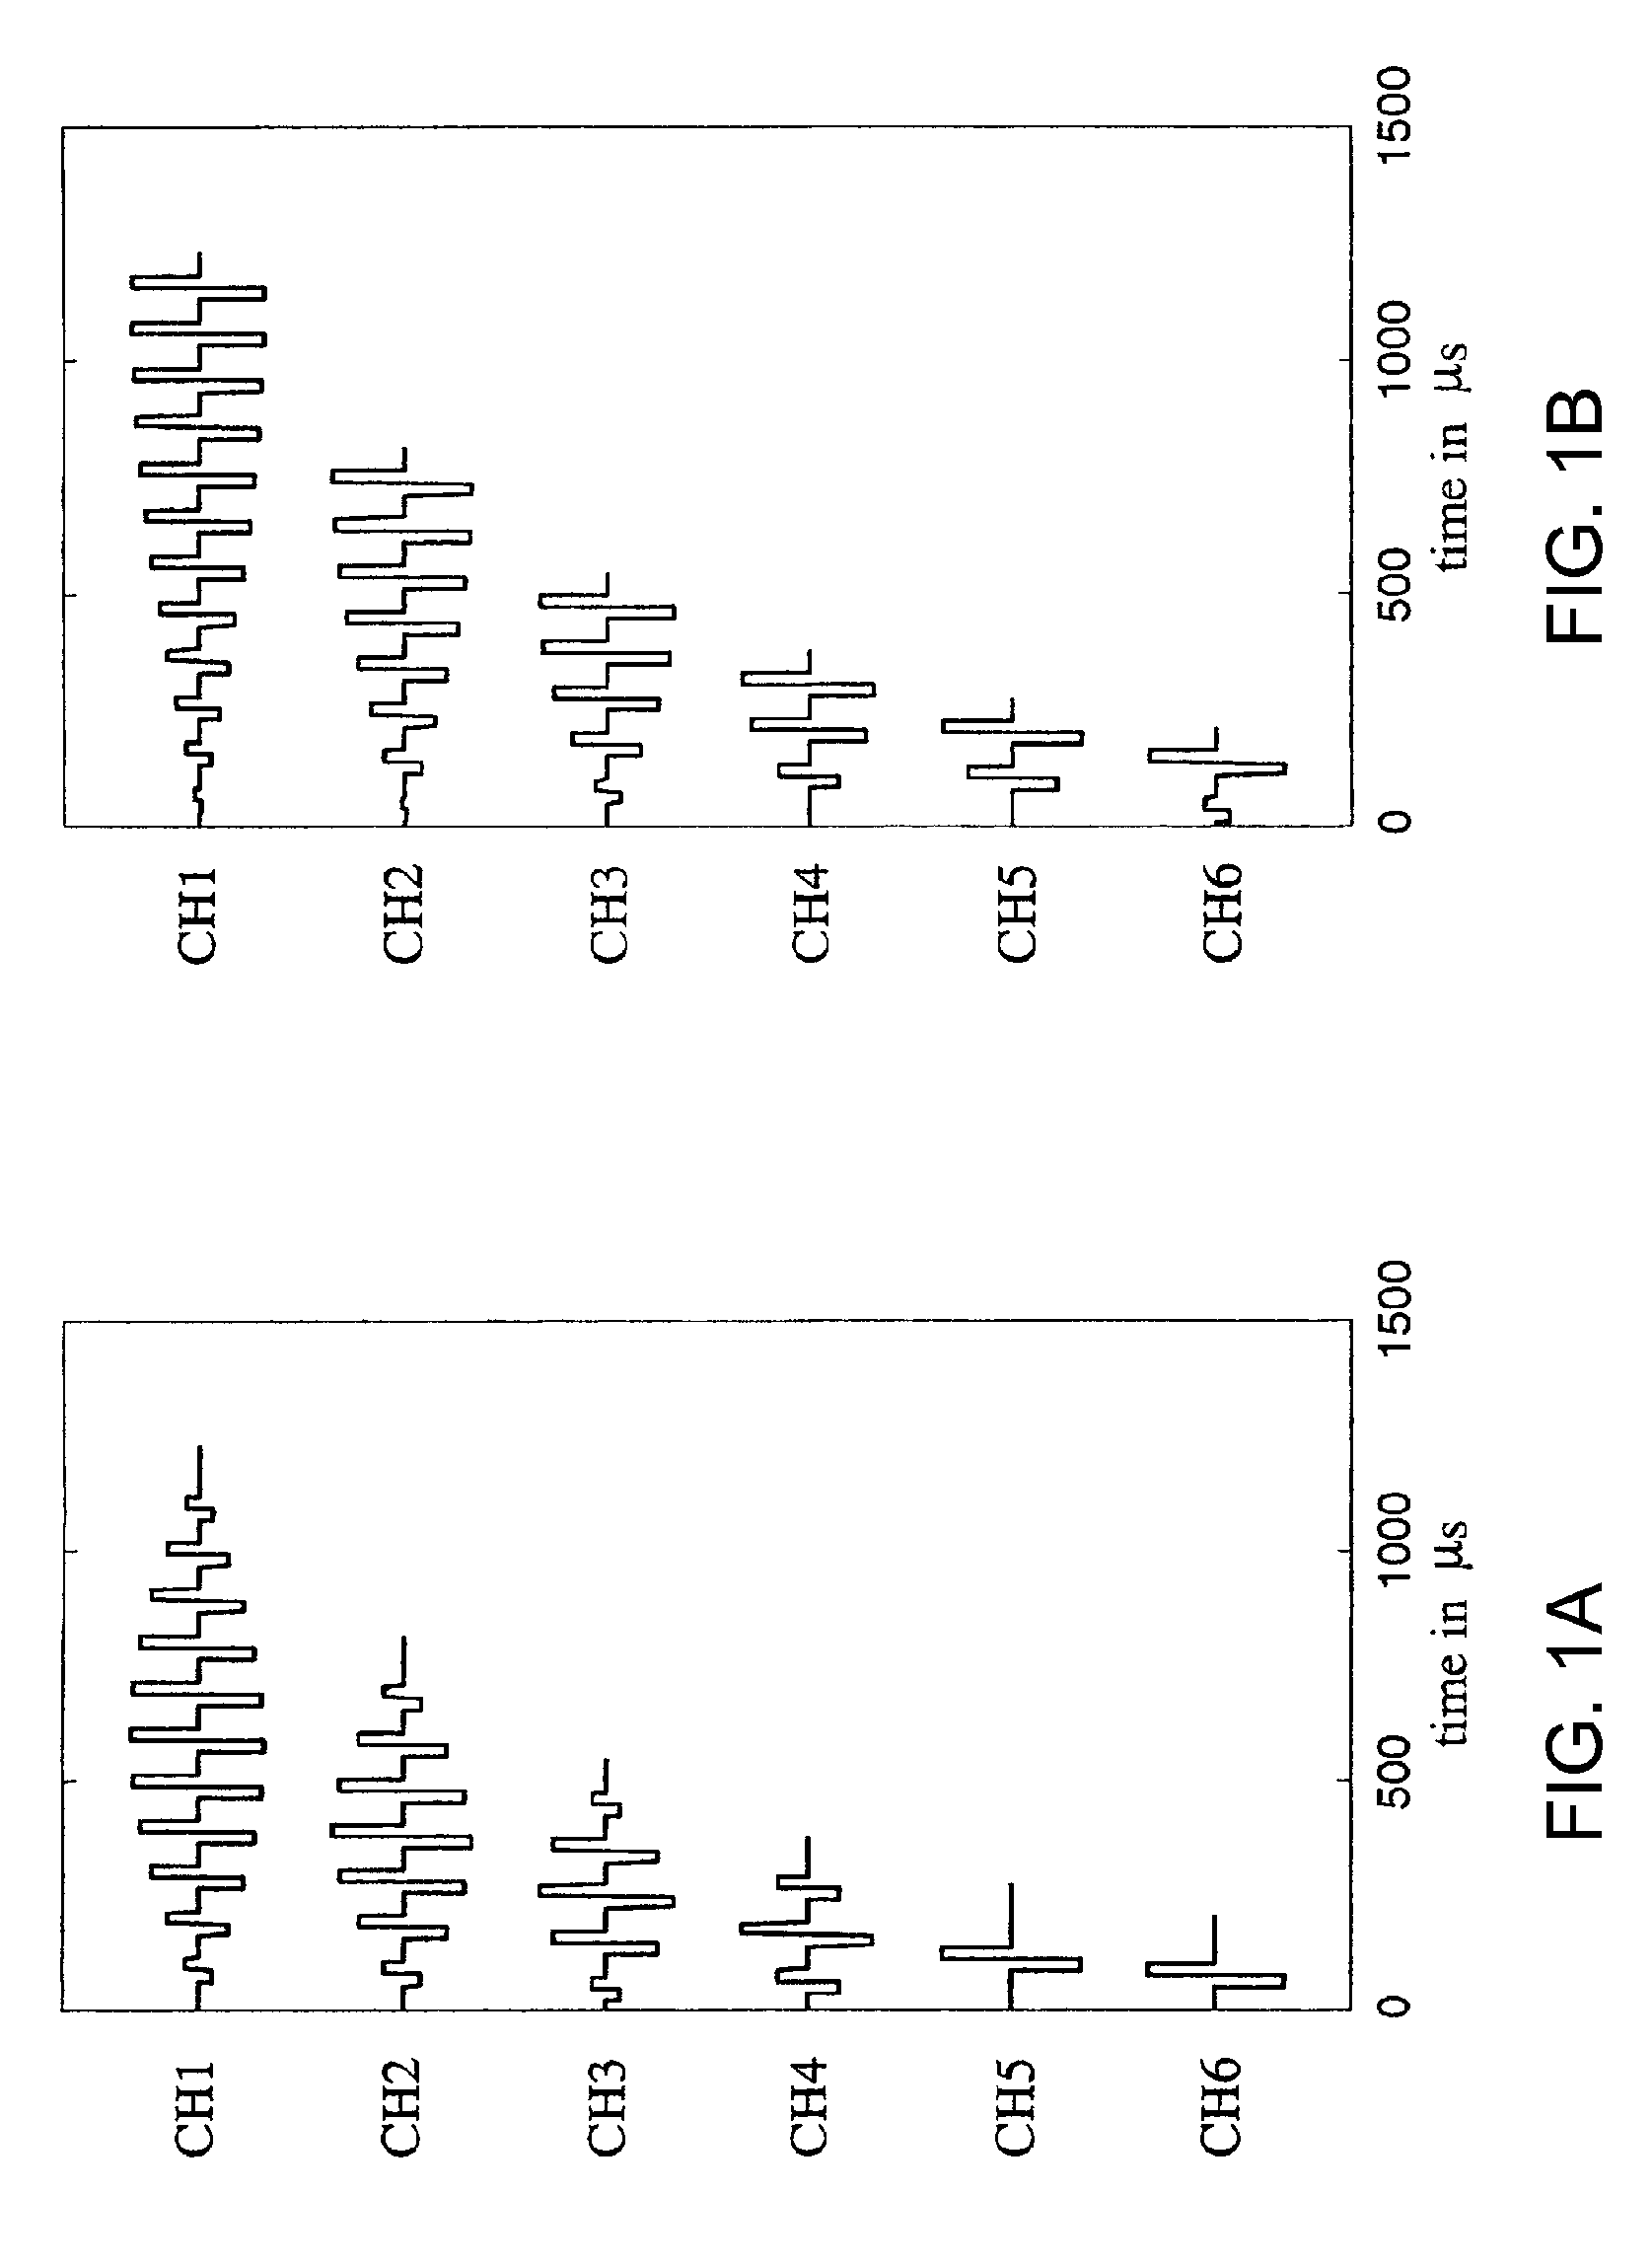 Electrical Nerve Stimulation Based on Channel Specific Sequences